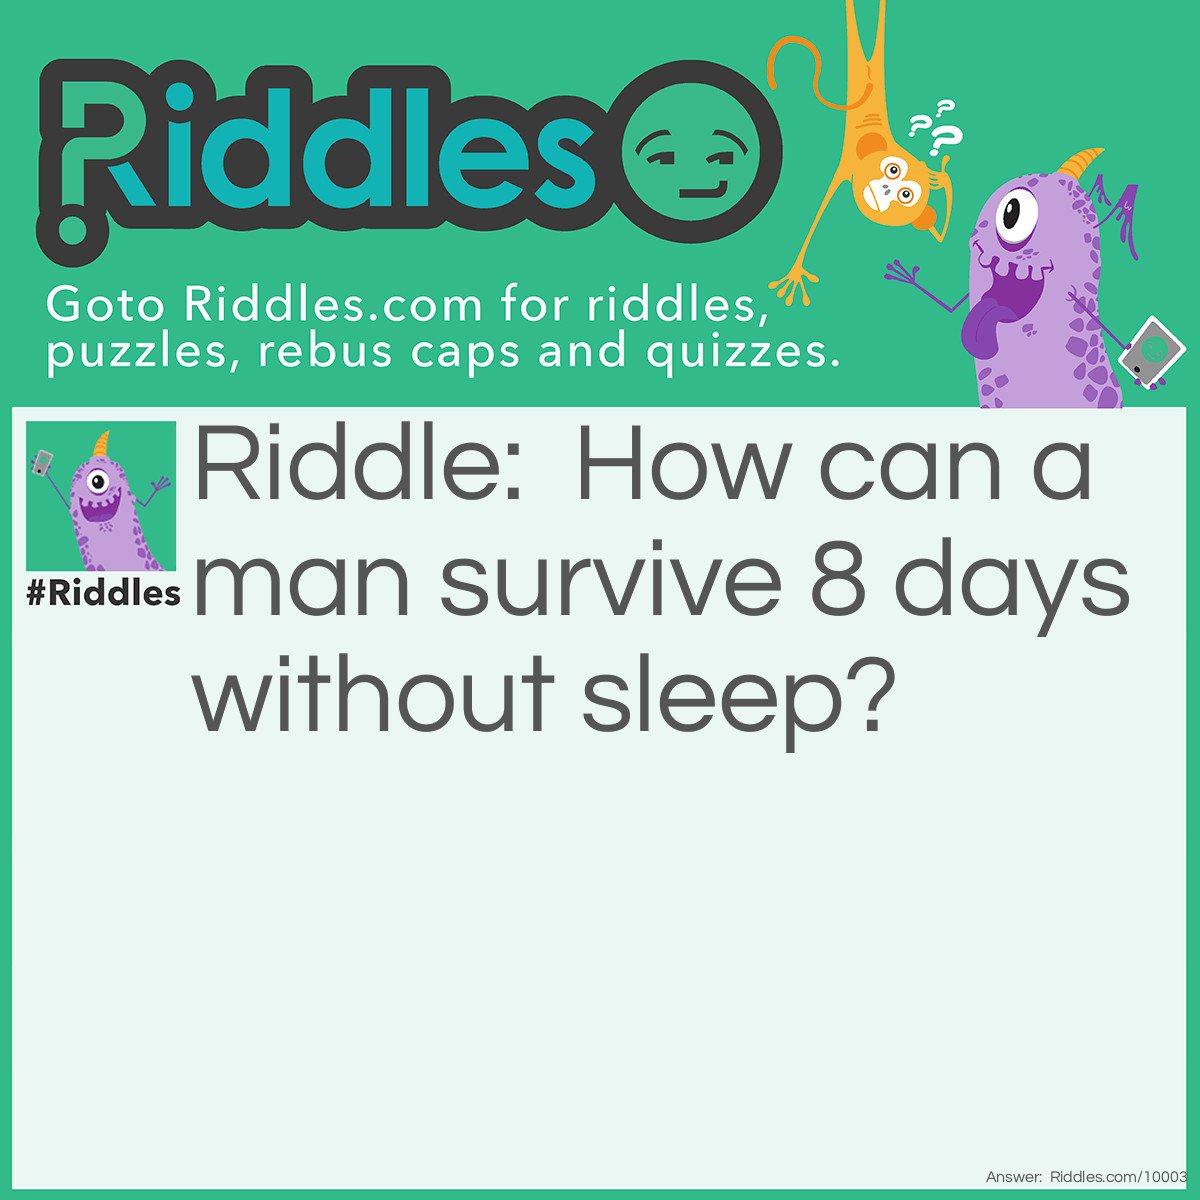 Riddle: How can a man survive 8 days without sleep? Answer: He should just sleep at night